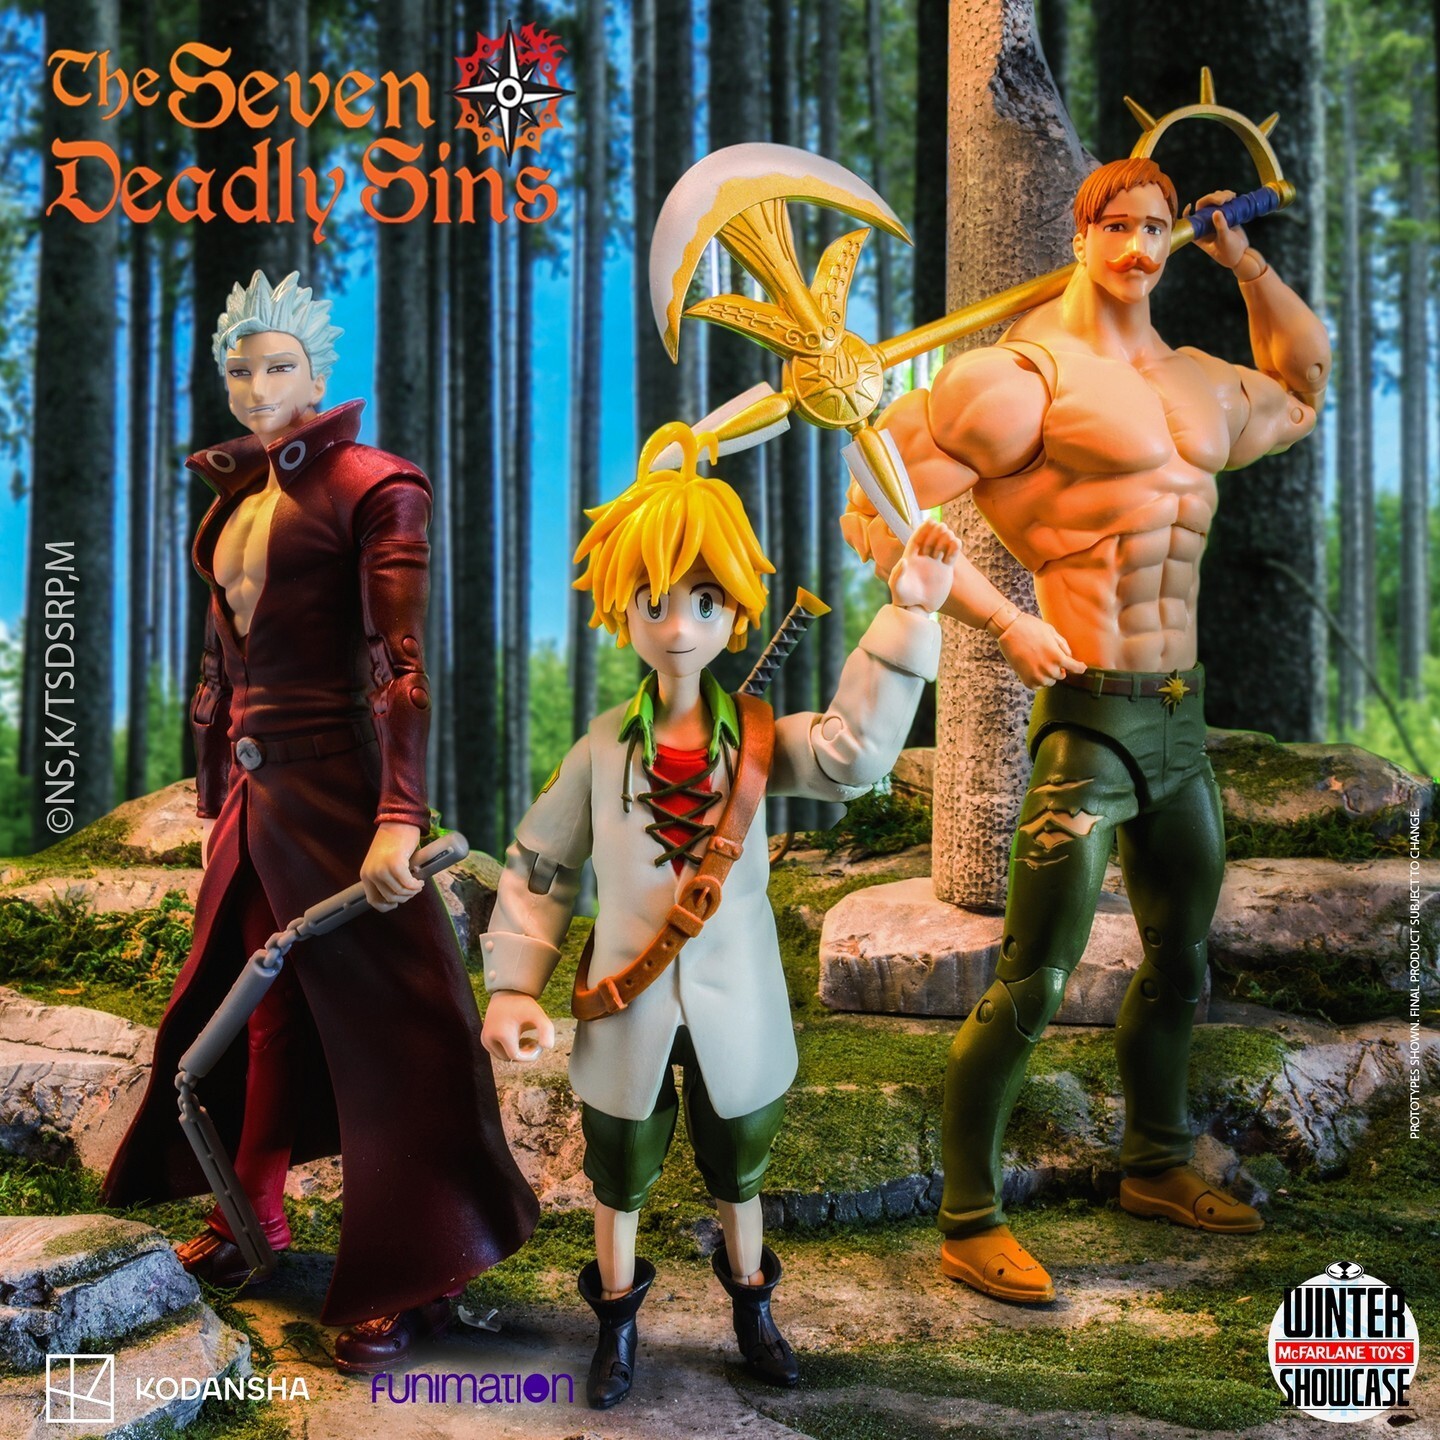 Seven Deadly Sins - I helped with articulation engineering and minor sculpt revisions on all 3 of these figures